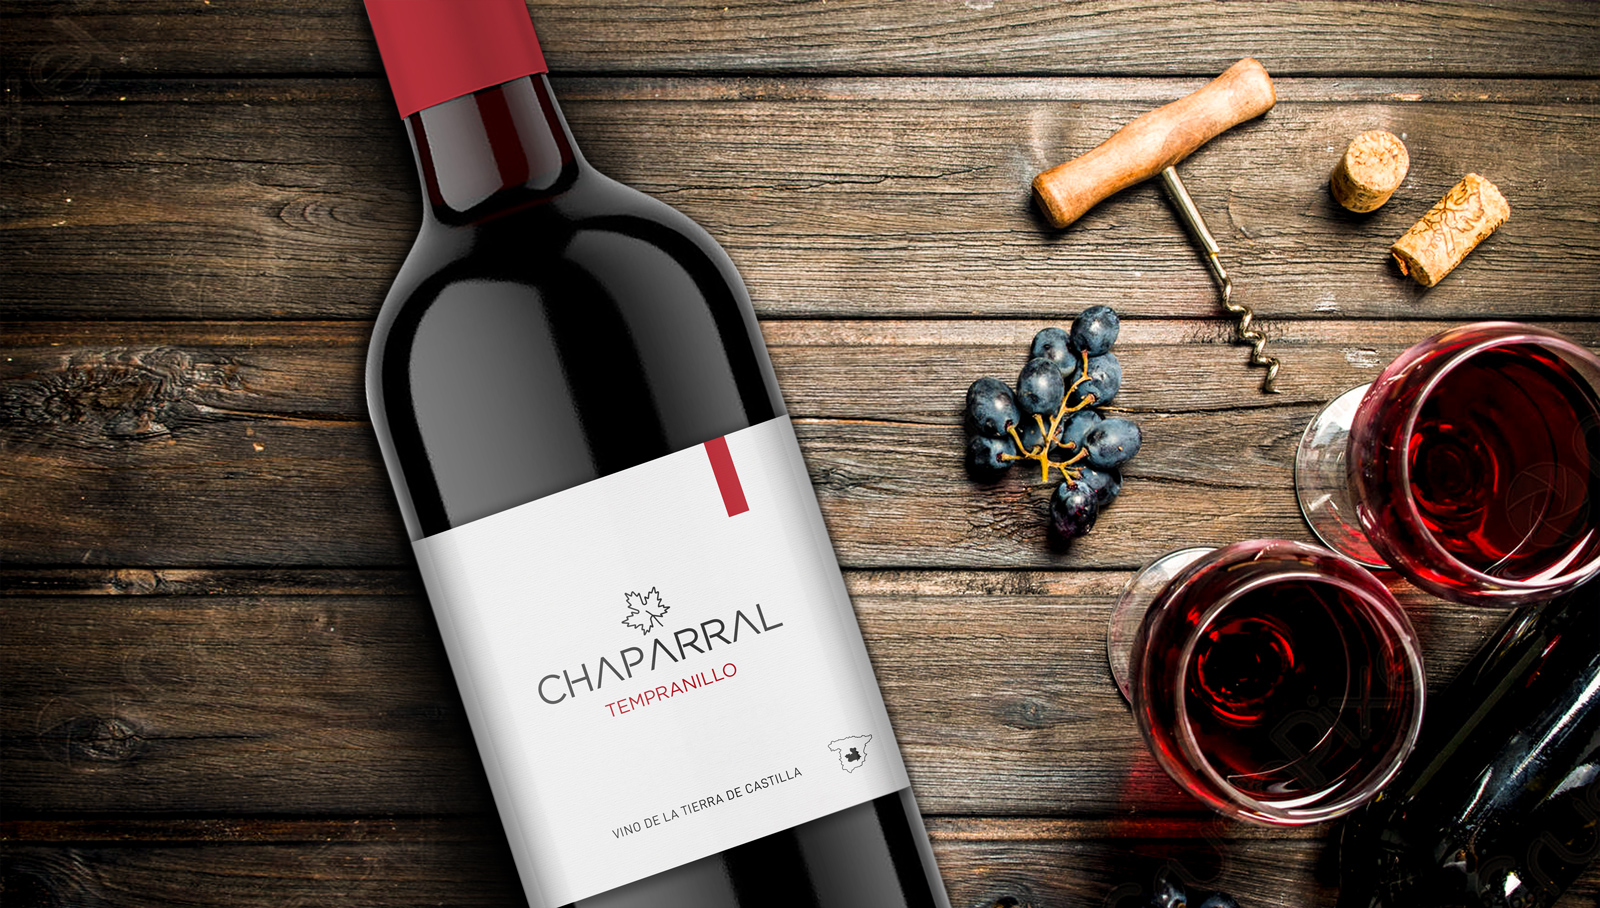 Graphic and creative design of wine labels and packaging for CHAPARRAL